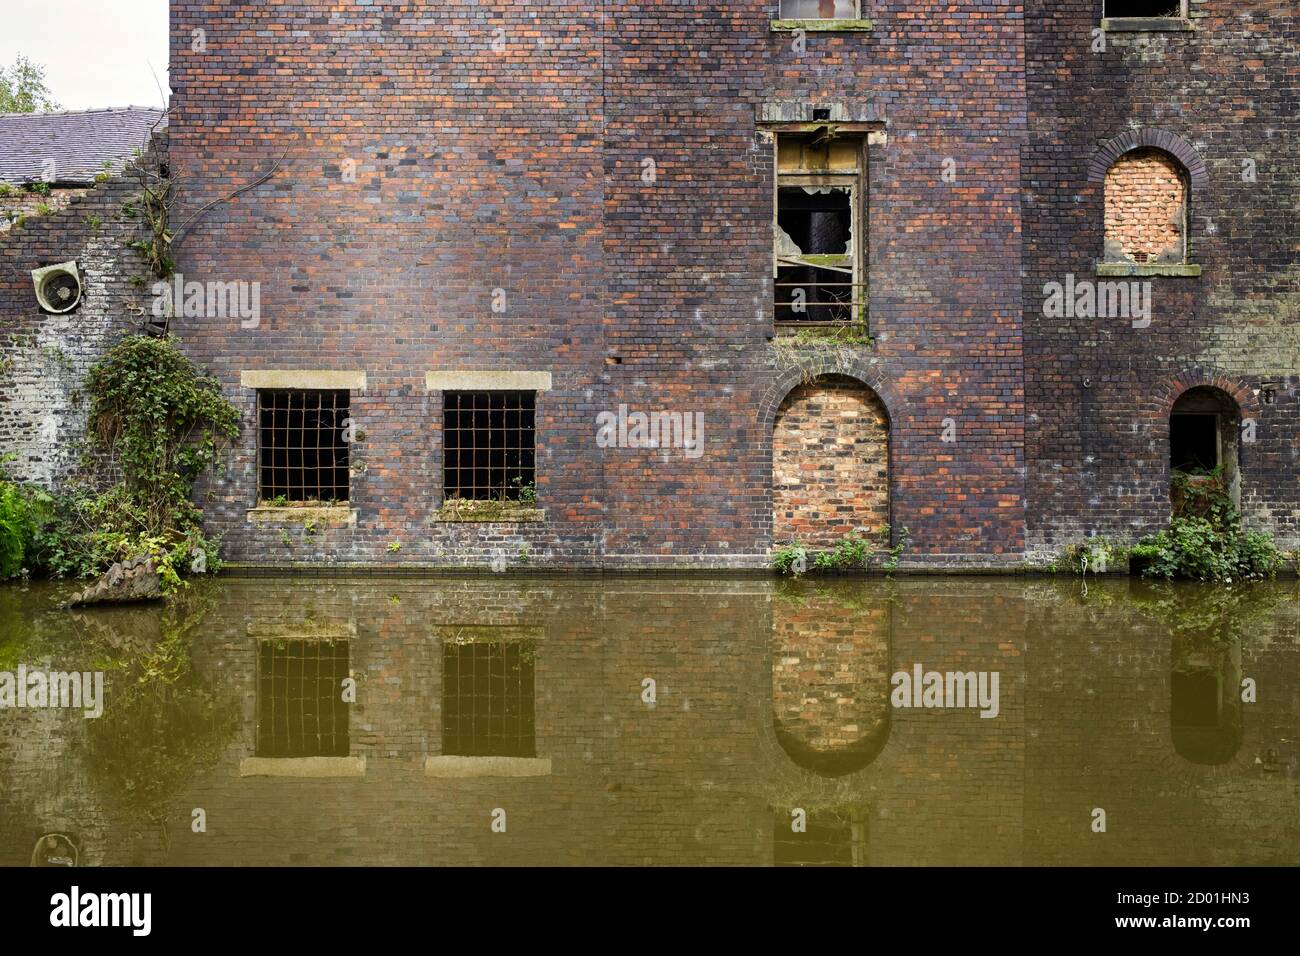 Abandoned warehouse on the banks of the Trent and Mersey canal at Stoke on Trent Stock Photo